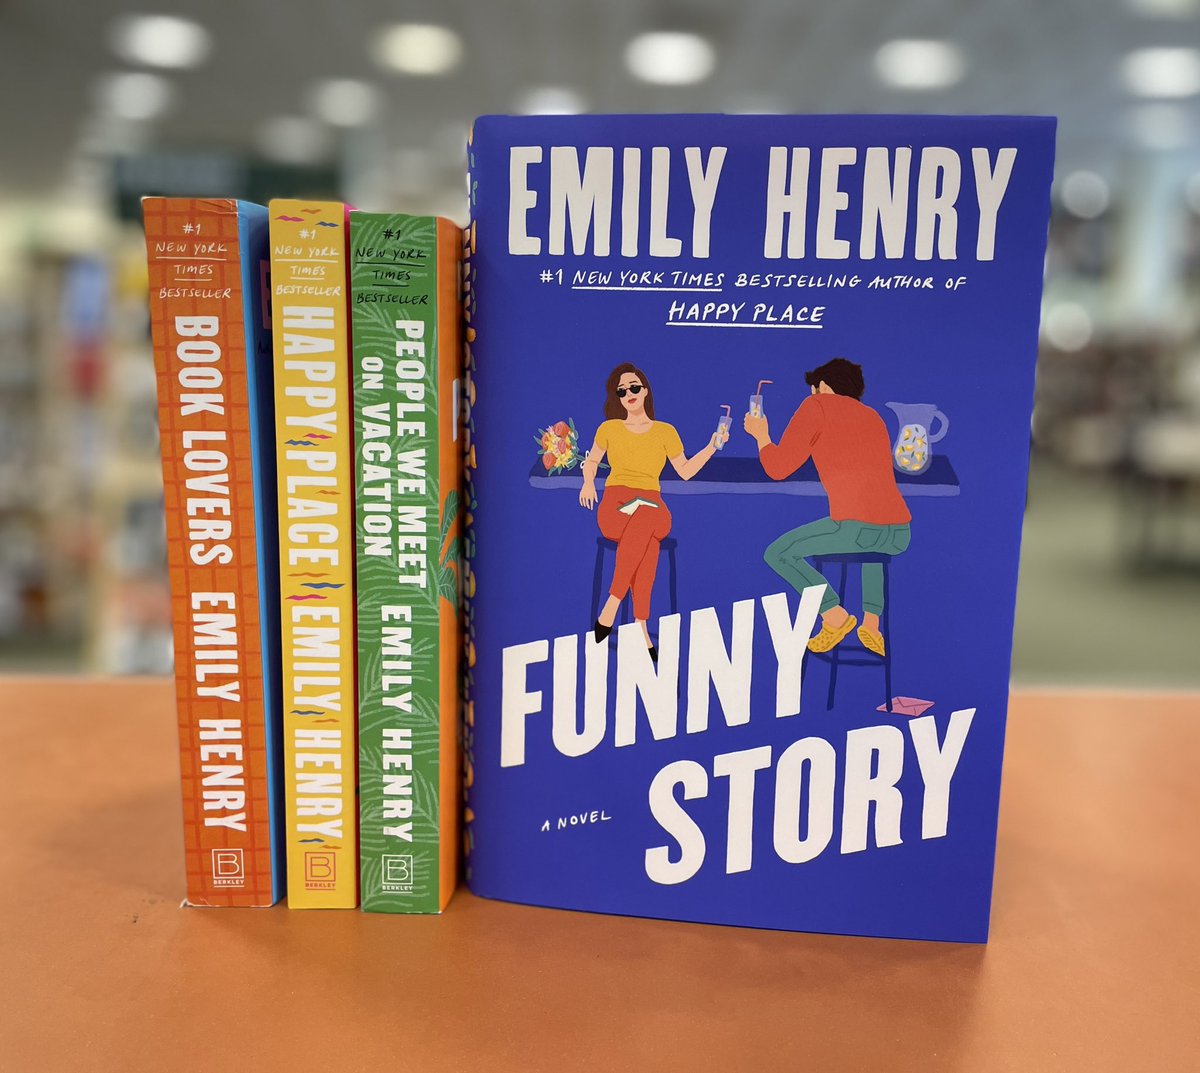 The latest Emily Henry book has hit the shelves. Funny Story is about the struggle of making friends as an adult and relationships. Be prepared to laugh. #romance #emilyhenry #funnystory #newrelease #tbrpile